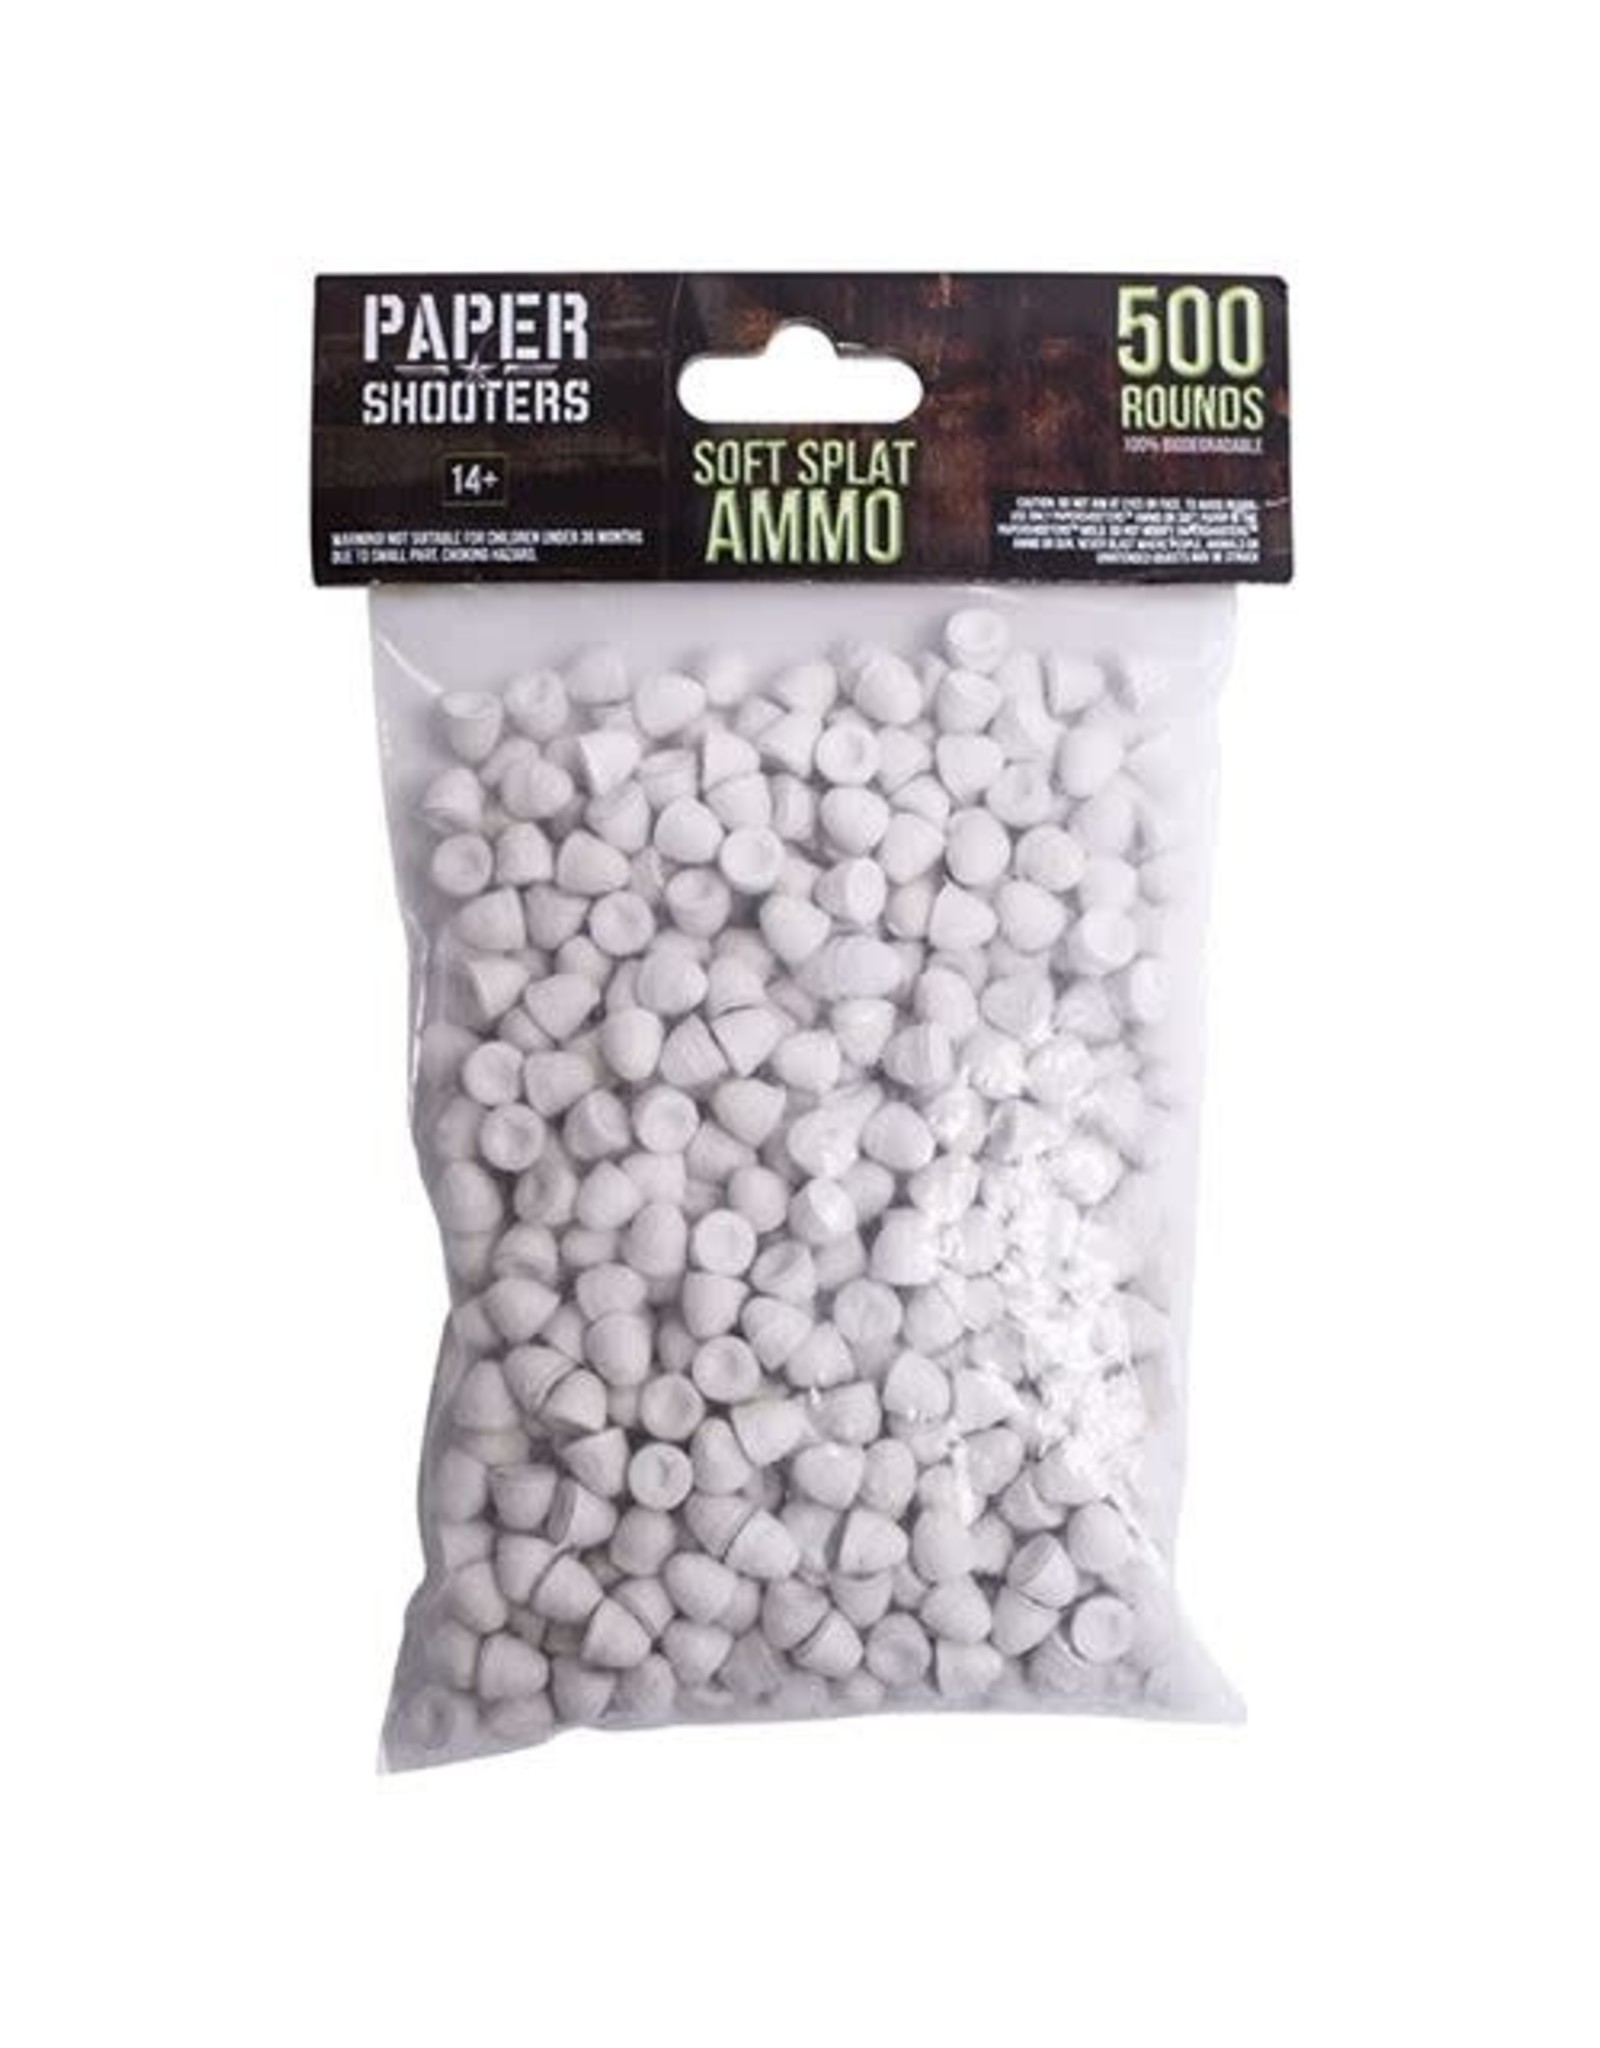 500 Rd Soft Splat Ammo Bag by Paper Shooters